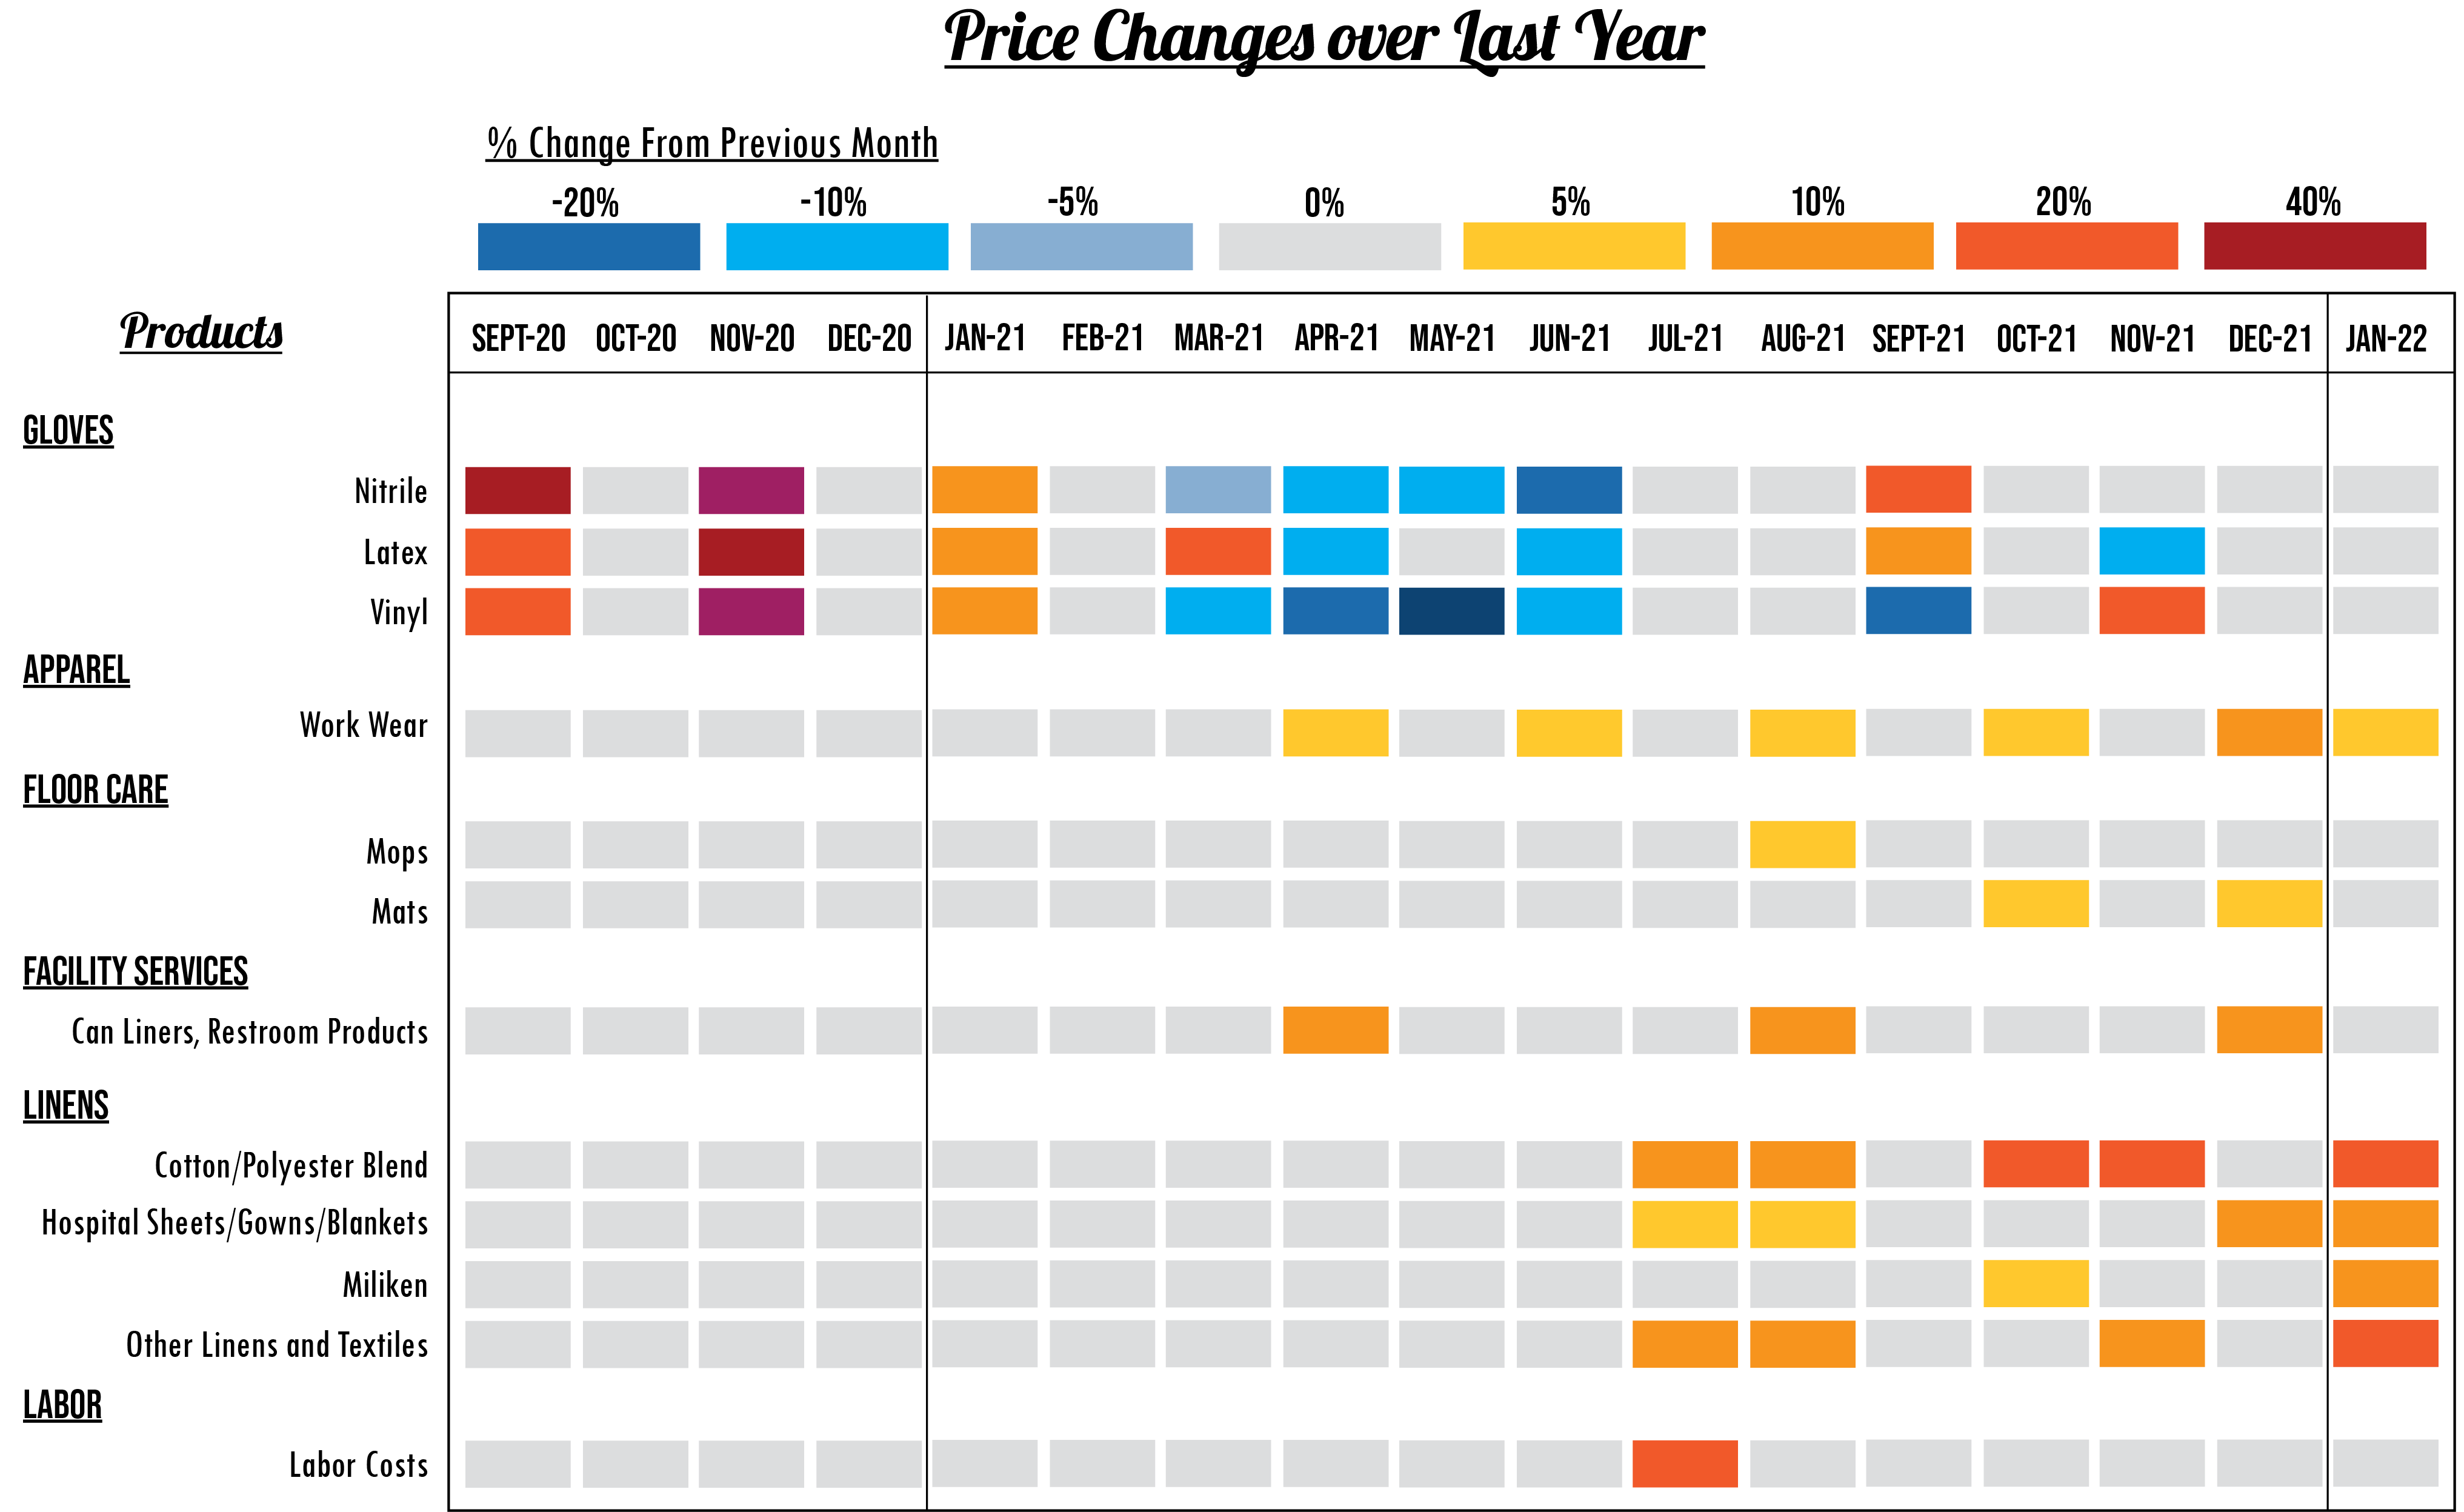 City products price changes from Sept 2020 - Jan 2022